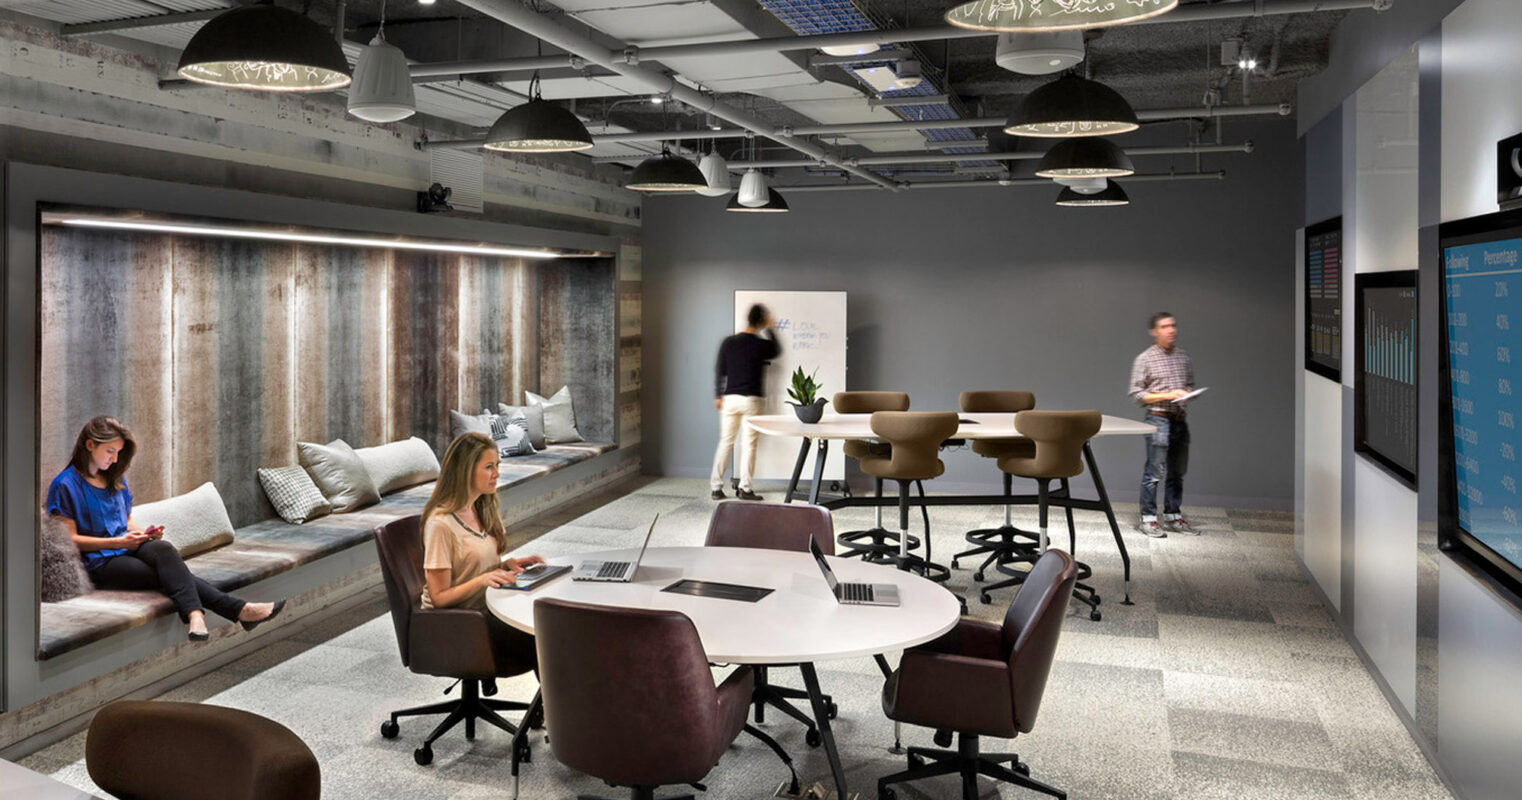 Modern office space blends industrial and rustic elements, featuring exposed ceilings, pendant lighting, distressed wood accents, and ergonomic furniture for a collaborative environment. People work comfortably at communal tables and lounge areas.